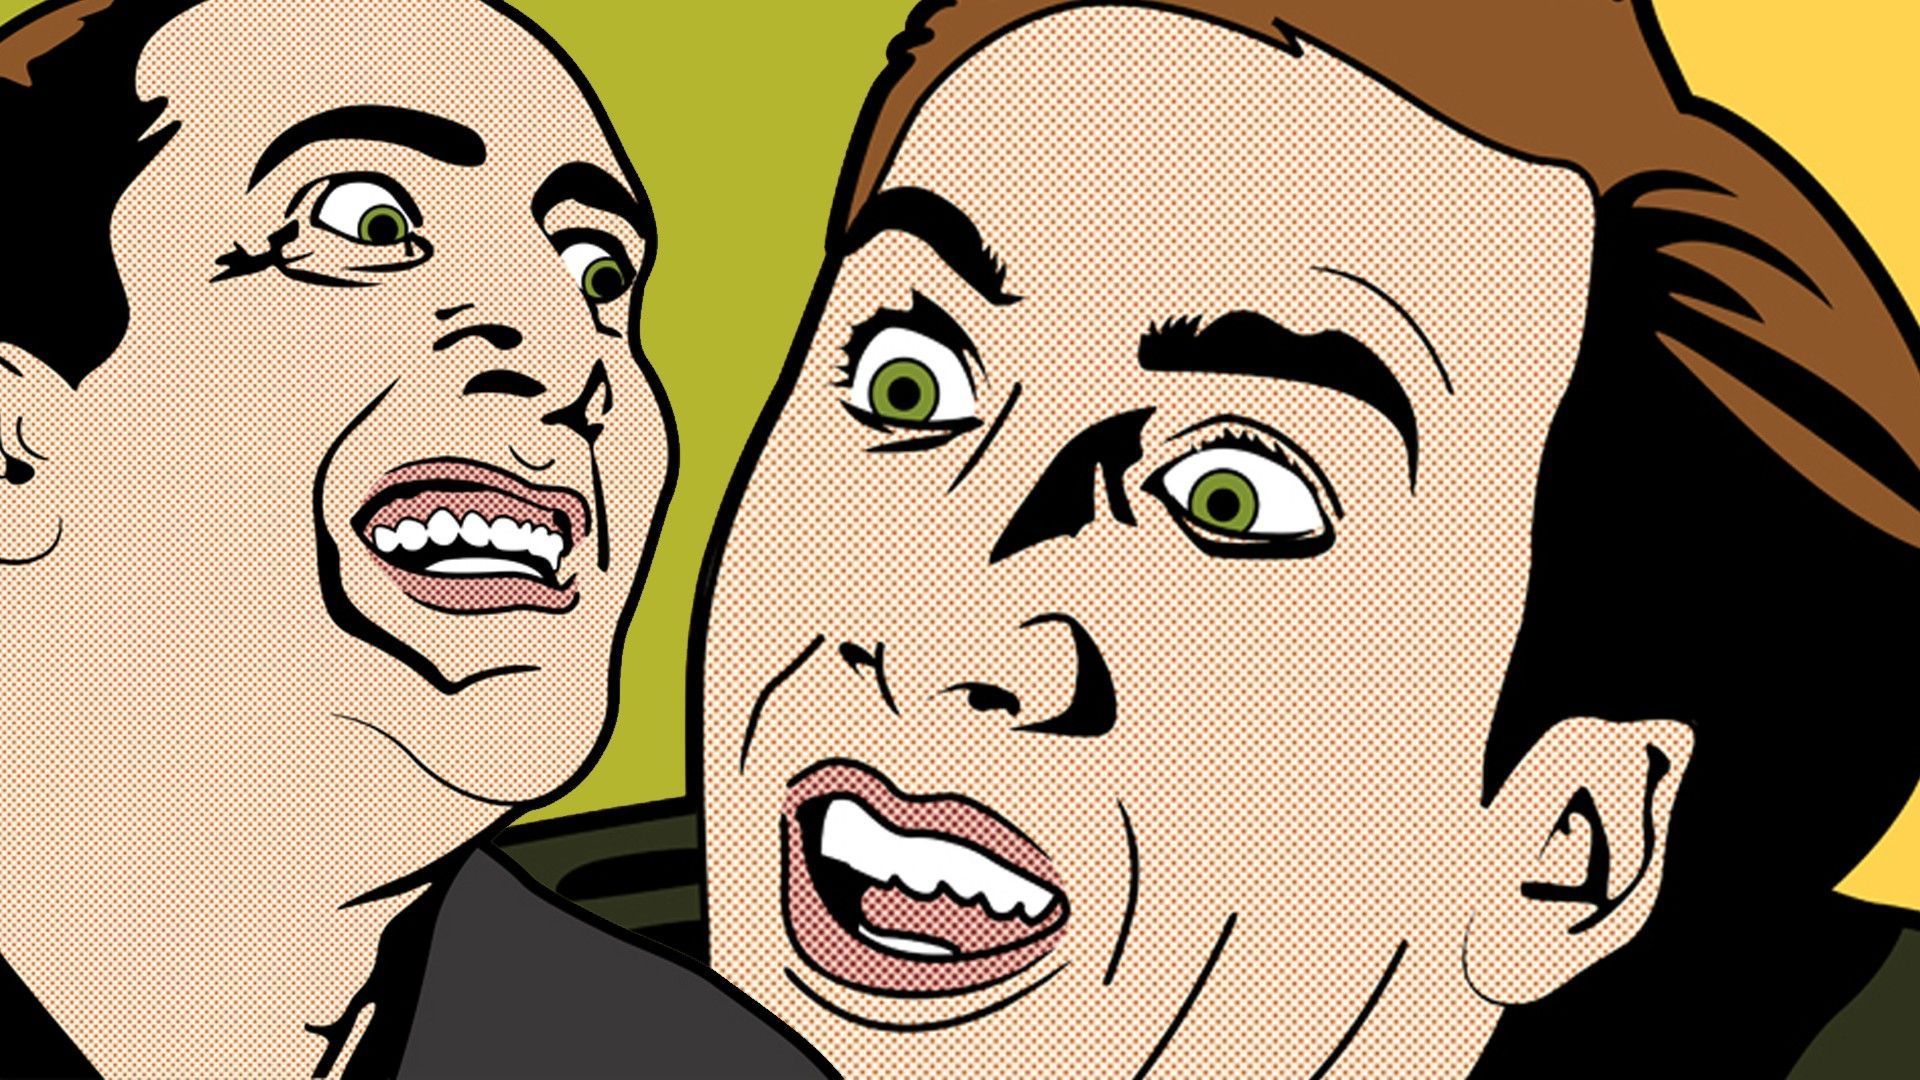 green, yellow, meme, Nicolas Cage, popart :: Wallpapers